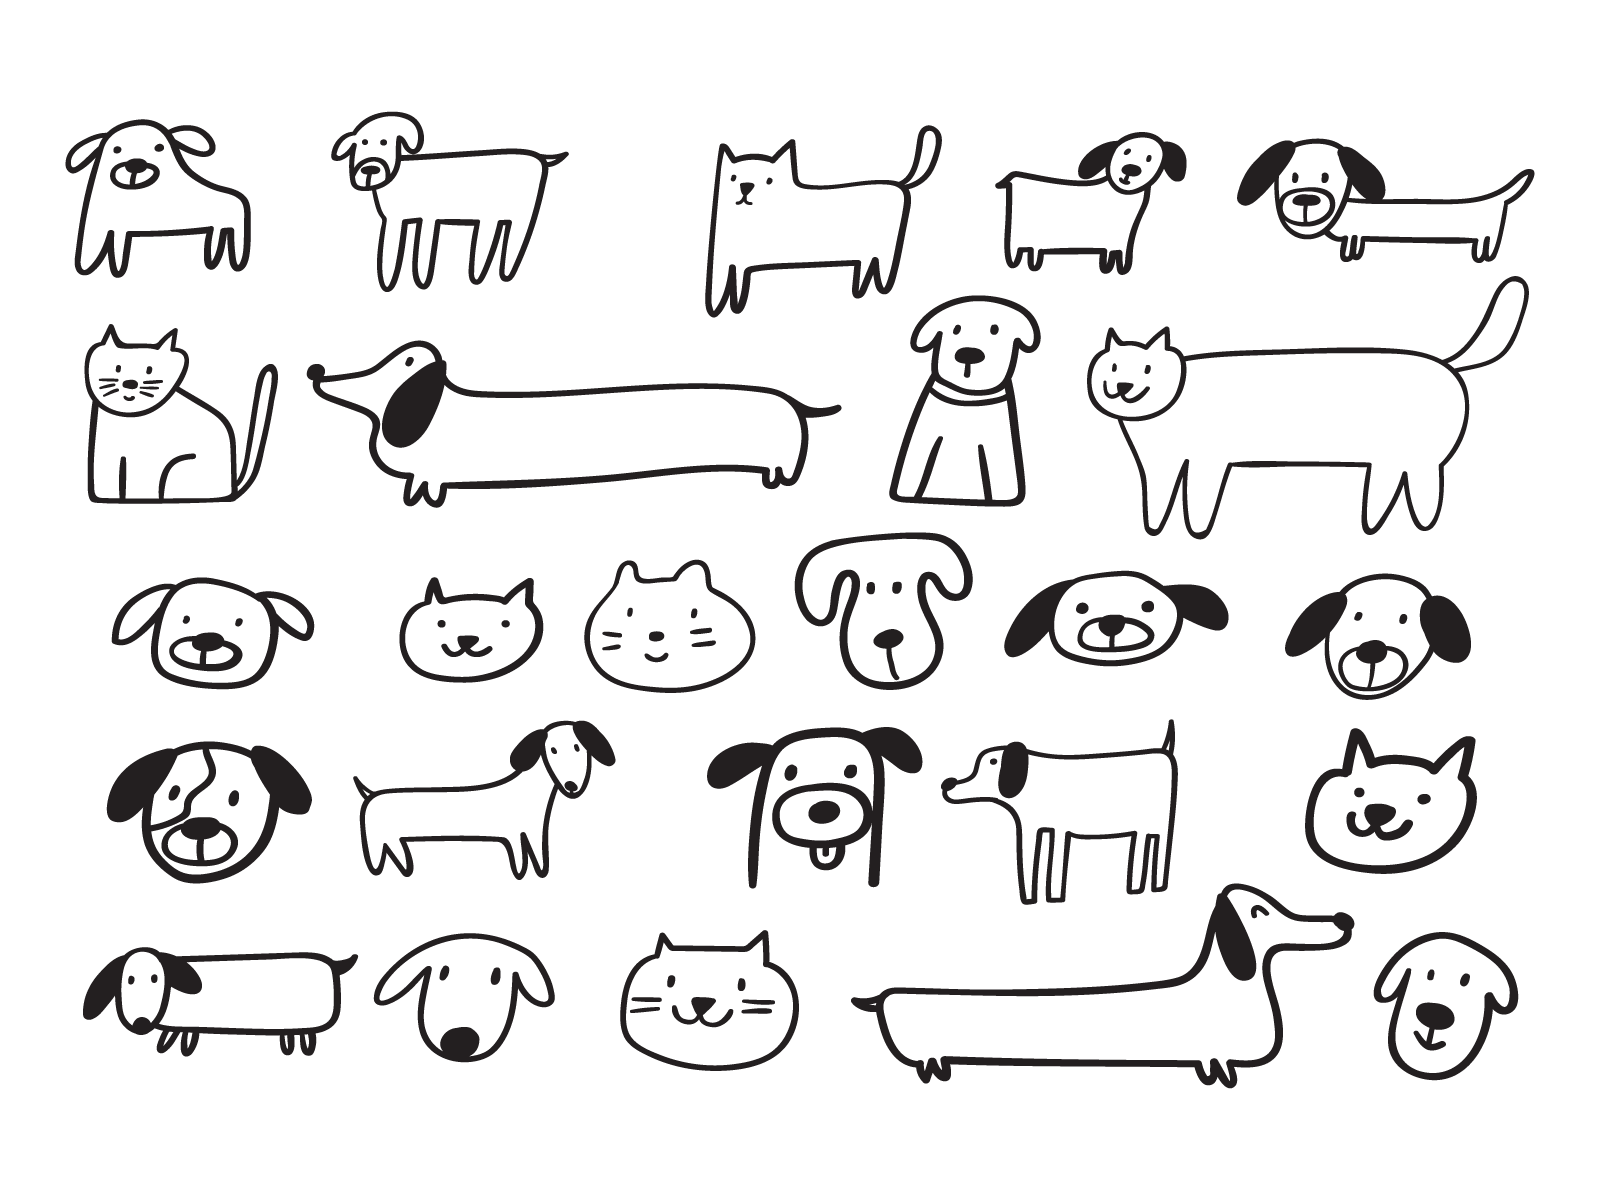 Cats and dogs black cat character cute design dog doodle face friend fun happy head icon kitty line logo outline pattern puppy vector